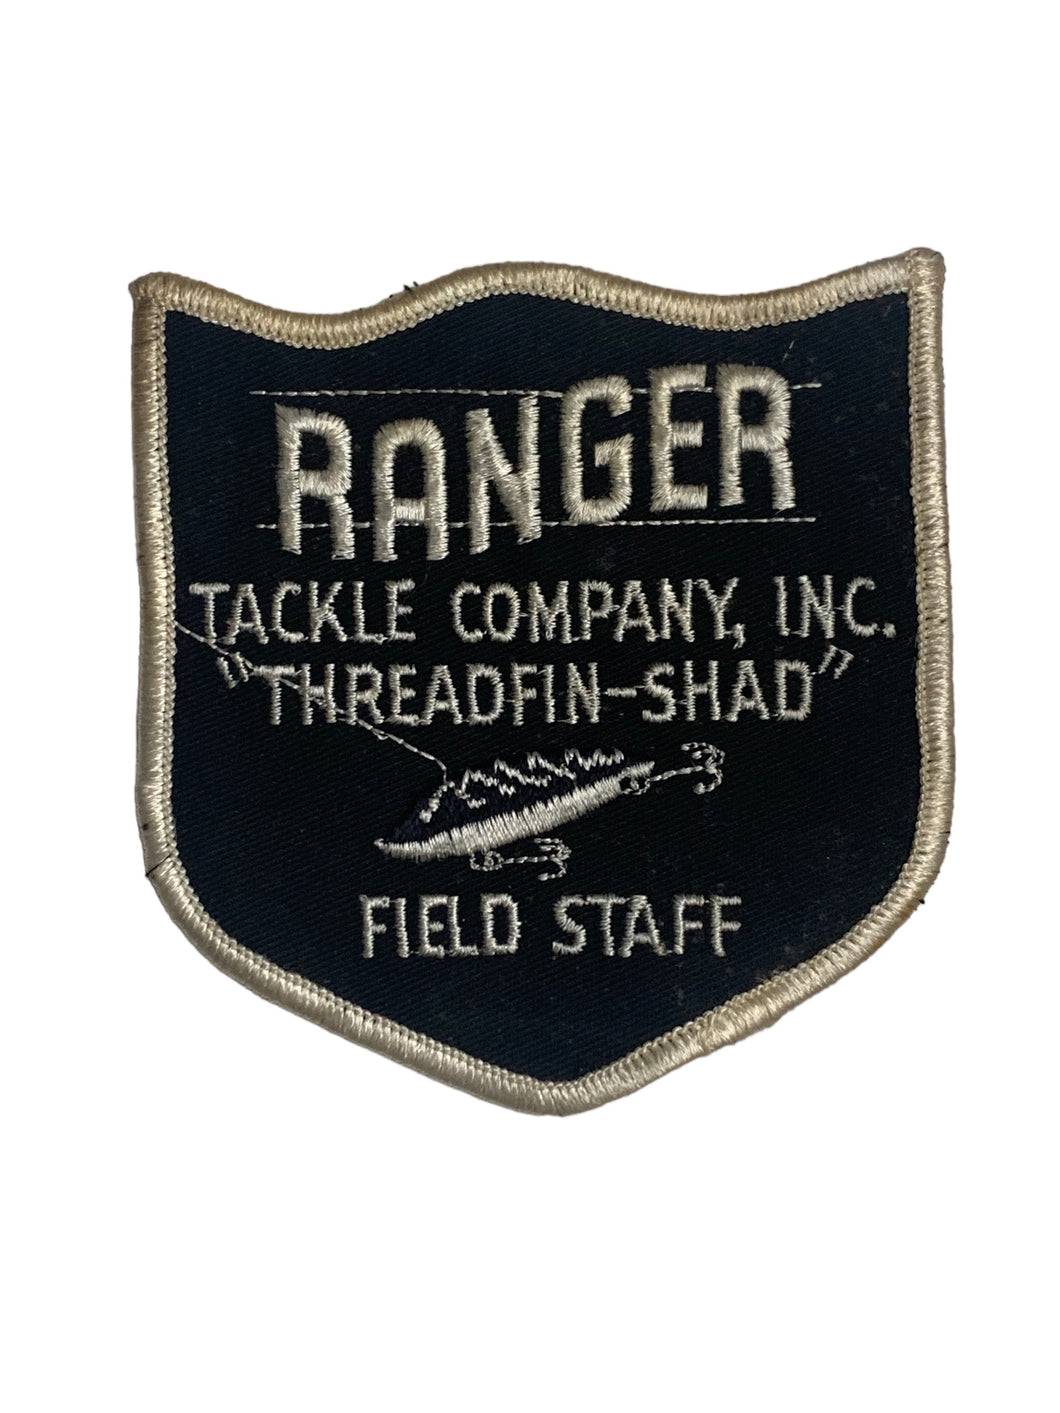 RANGER TACKLE COMPANY, INC • THREADFIN-SHAD FIELD STAFF Vintage Patch • Sleeve Size